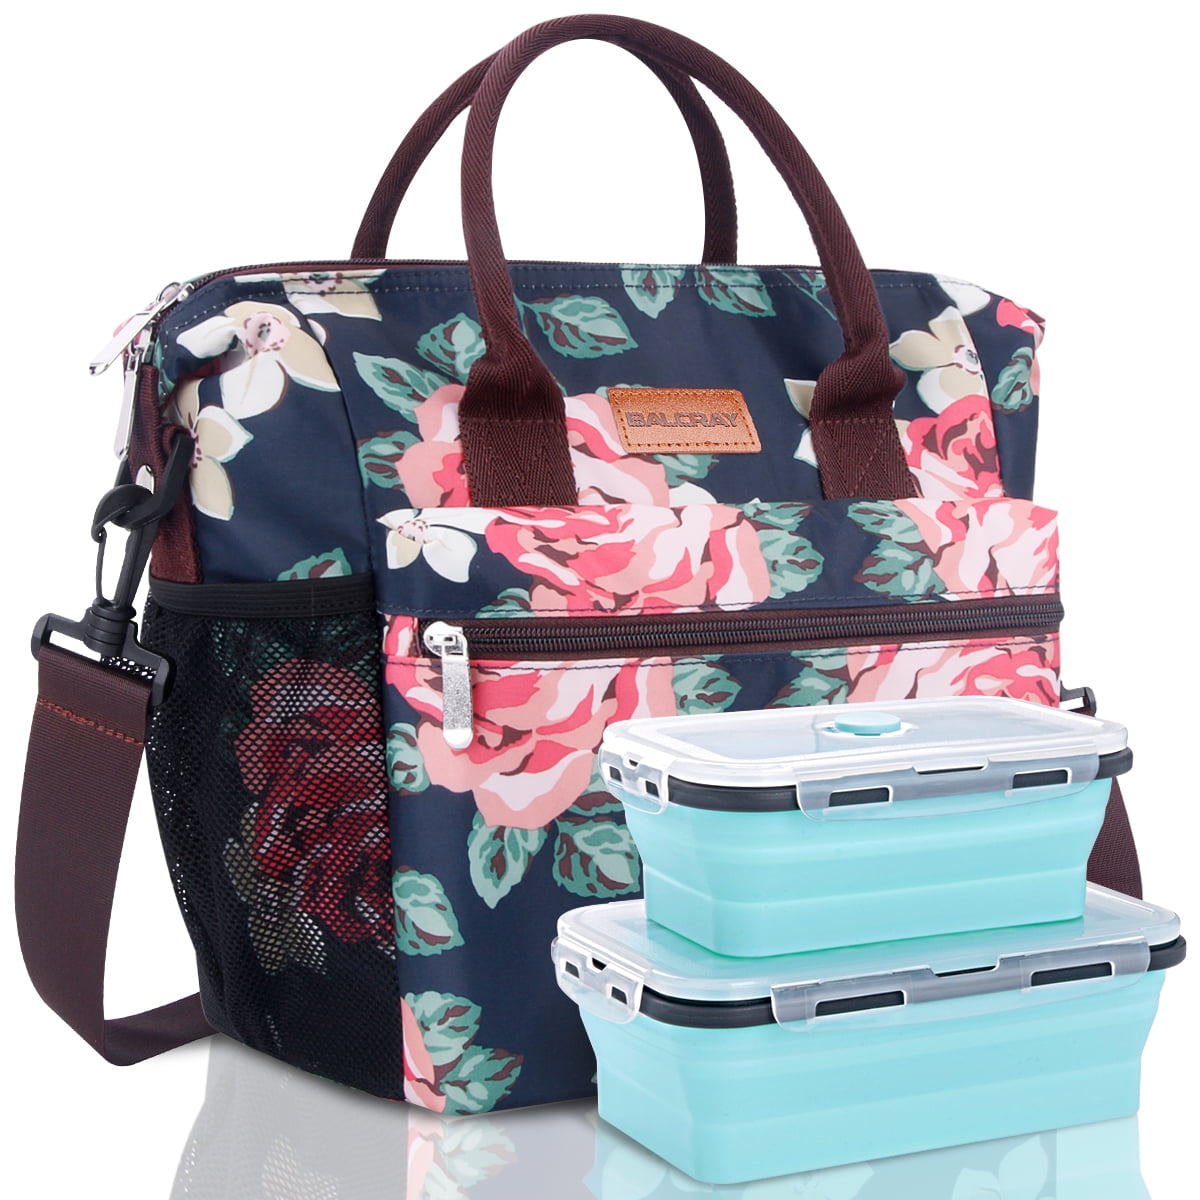 yoyoAmoy Insulated Lunch Bag, Aesthetic Flowers and Butterflies